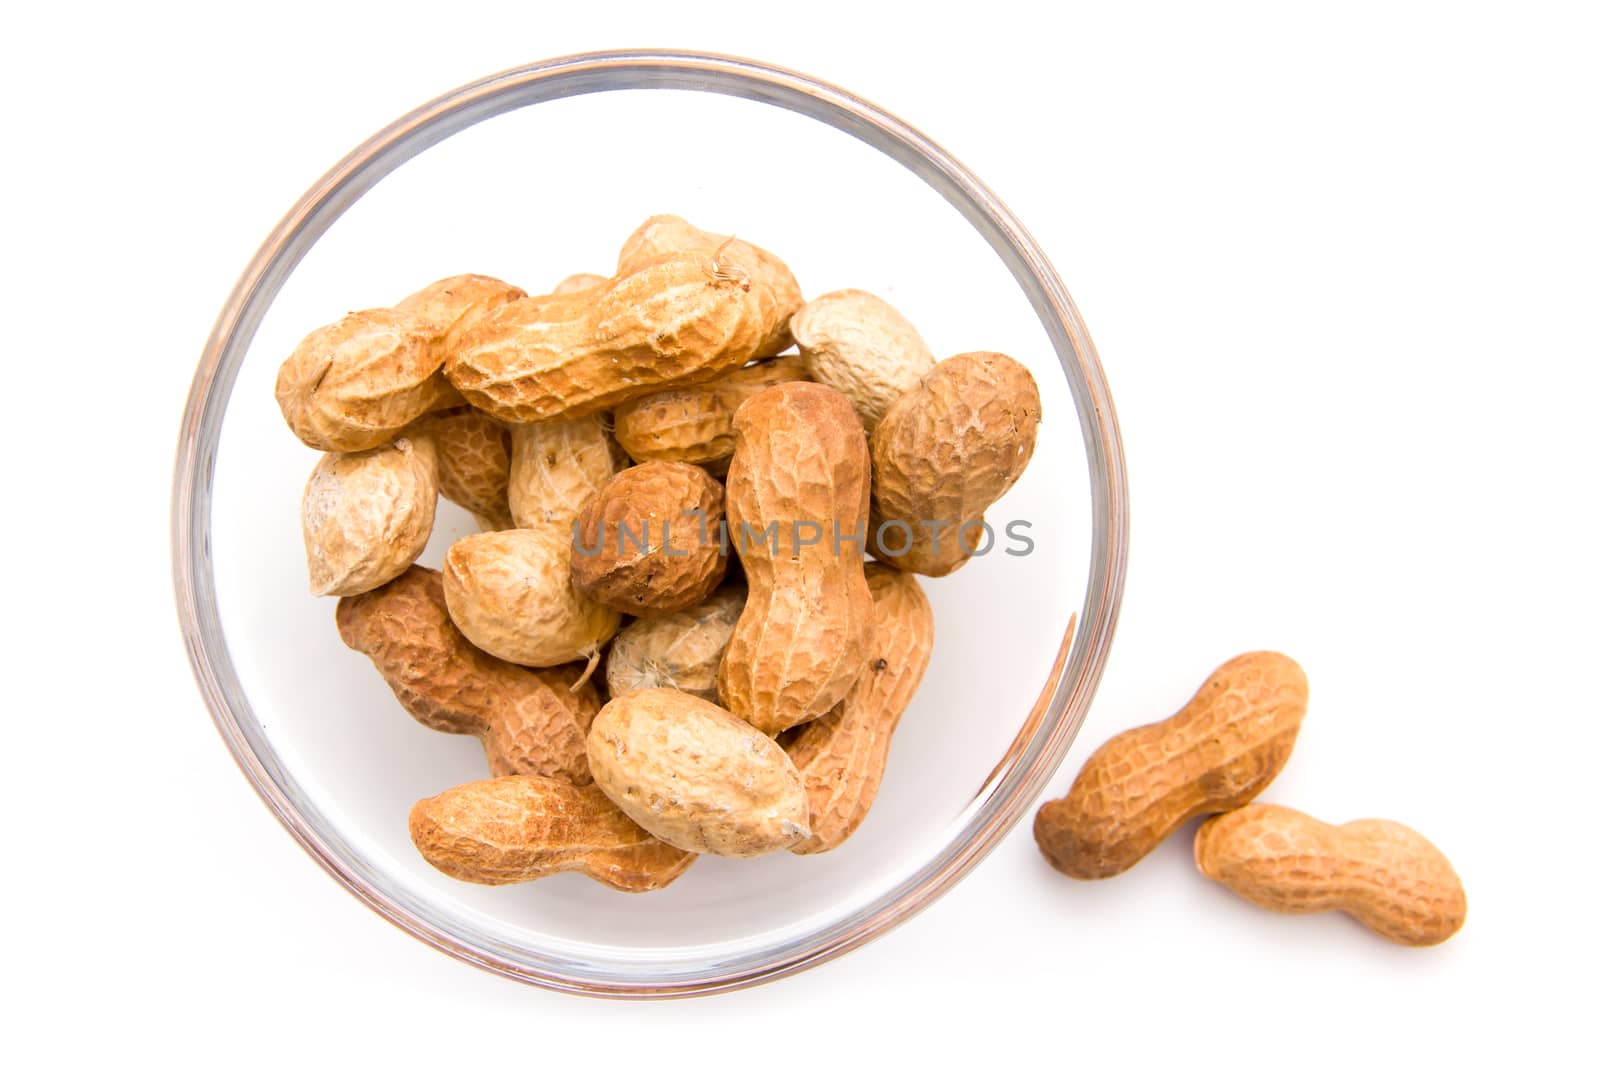 Peanuts on glass bowl on white background top view